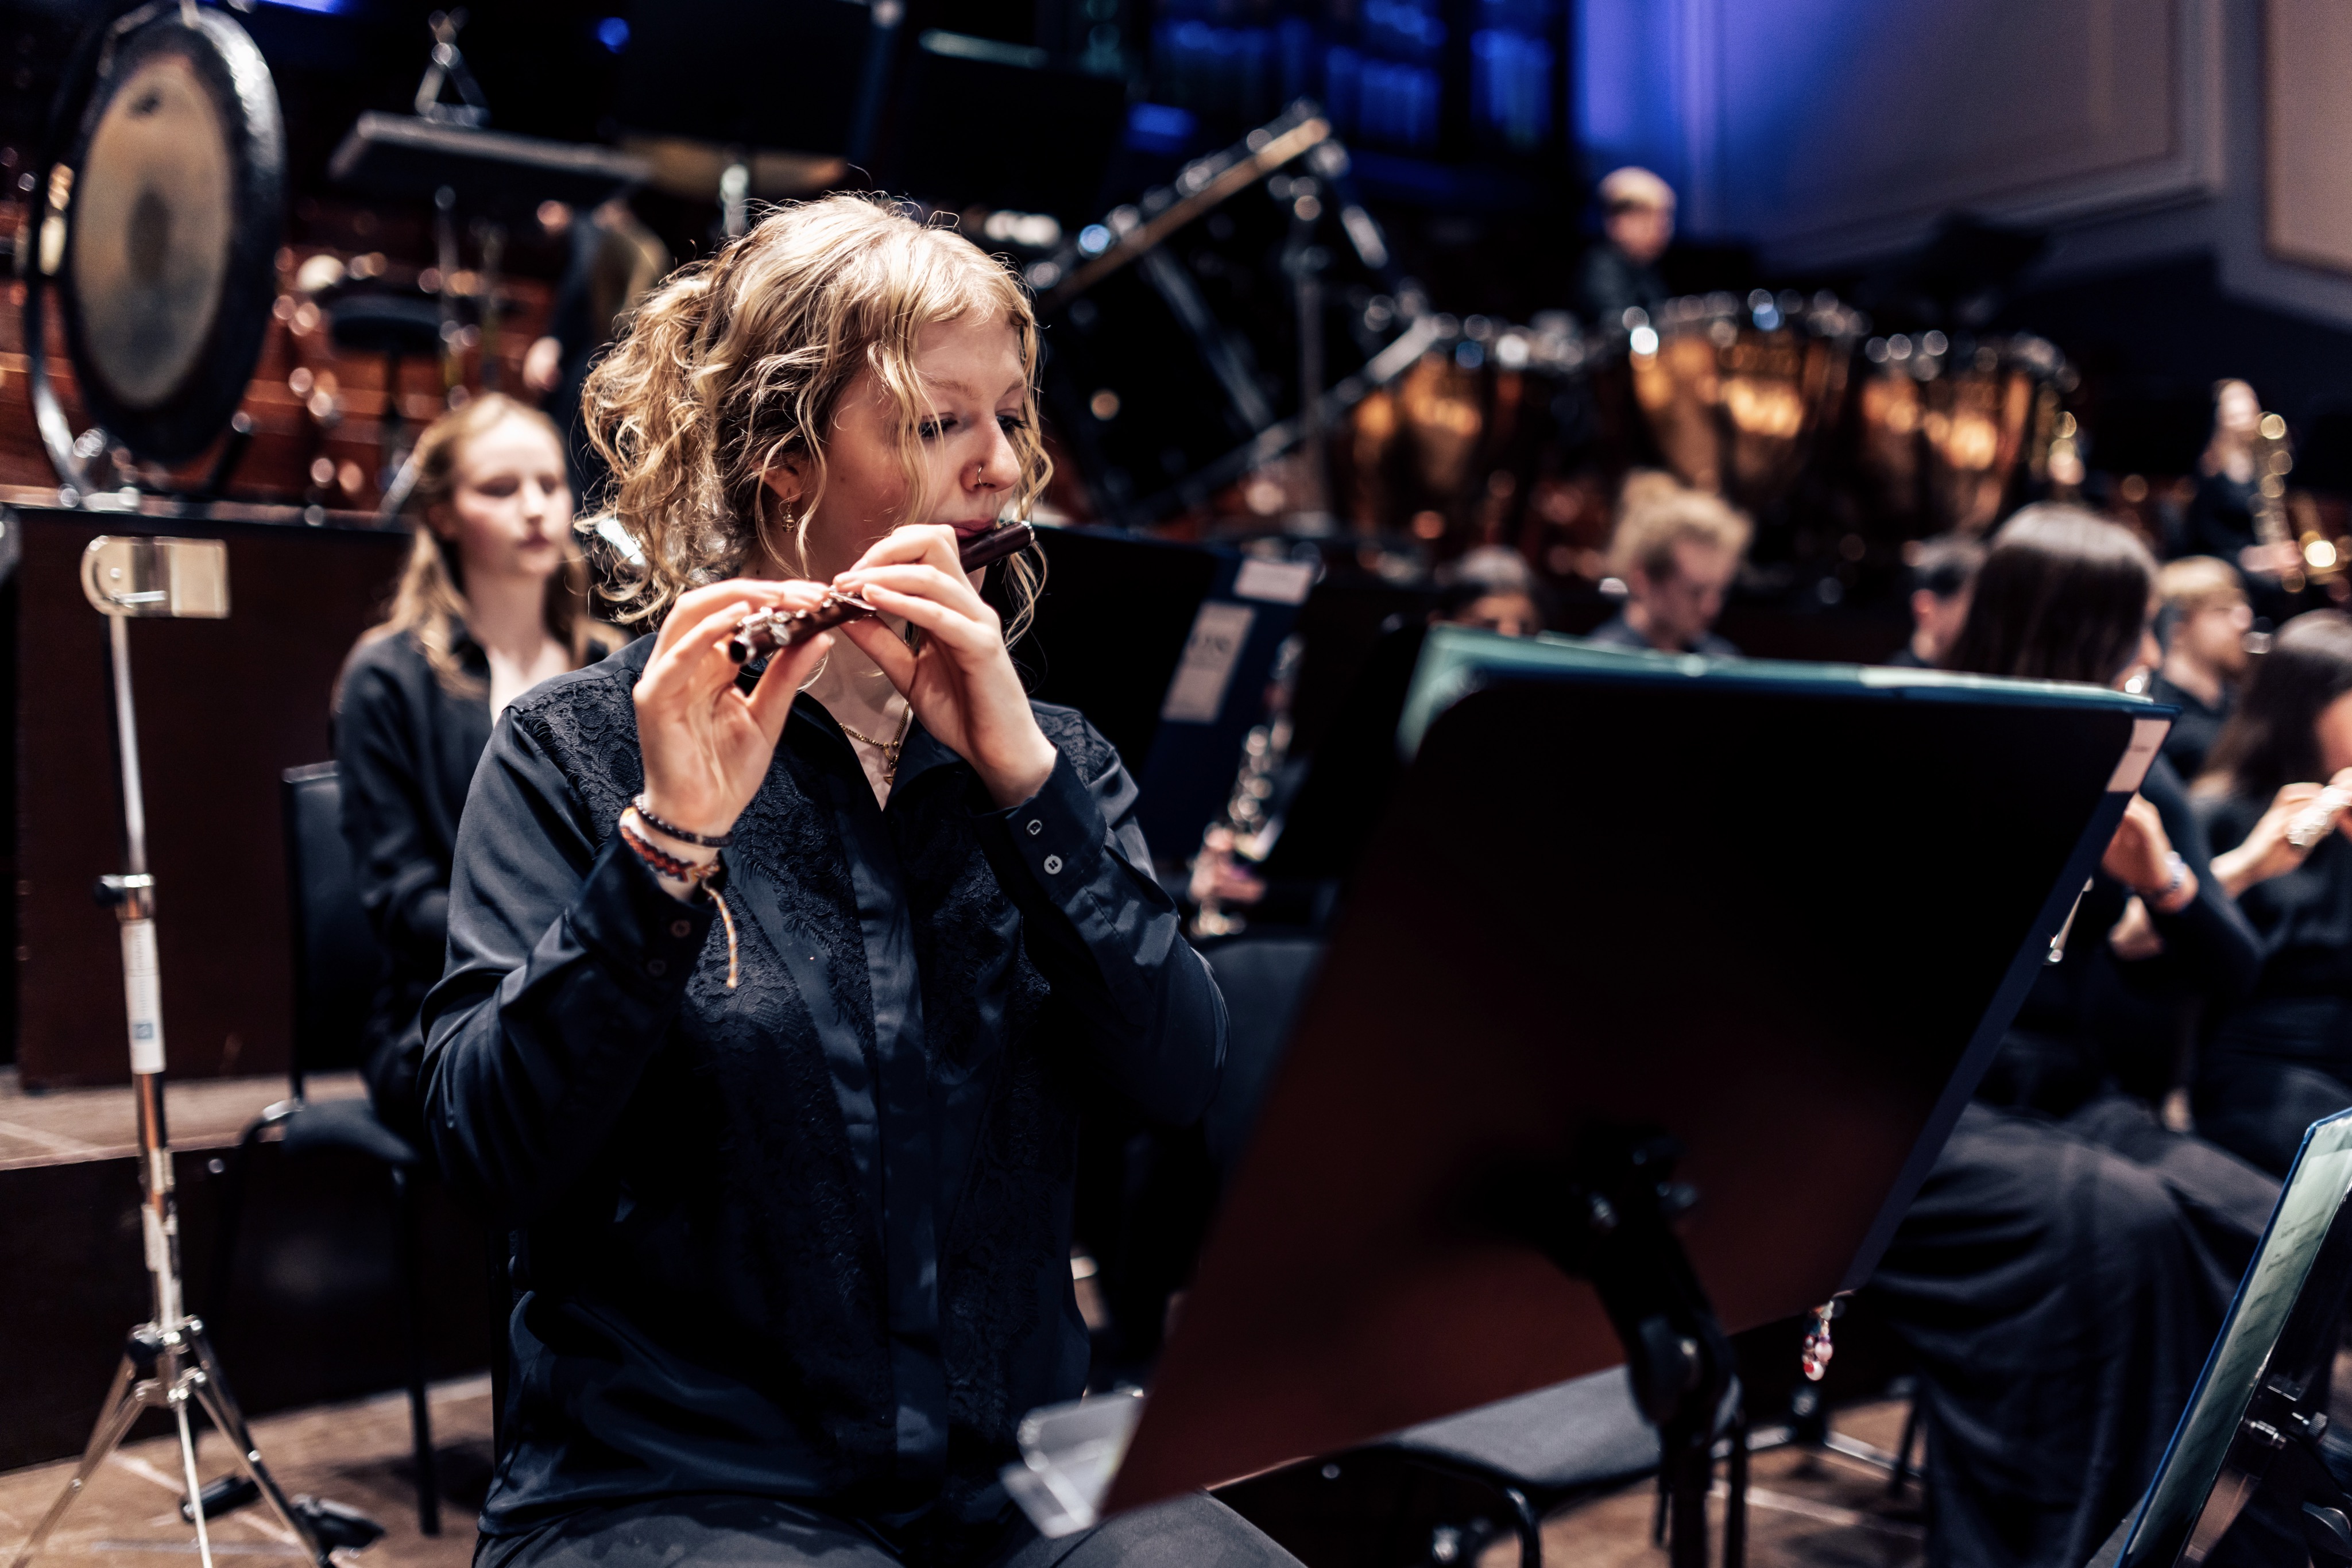 Catherine Larsen-Maguire conducts the National Youth Orchestra of Scotland for their Summer 2023 performance at Edinburgh's Usher Hall